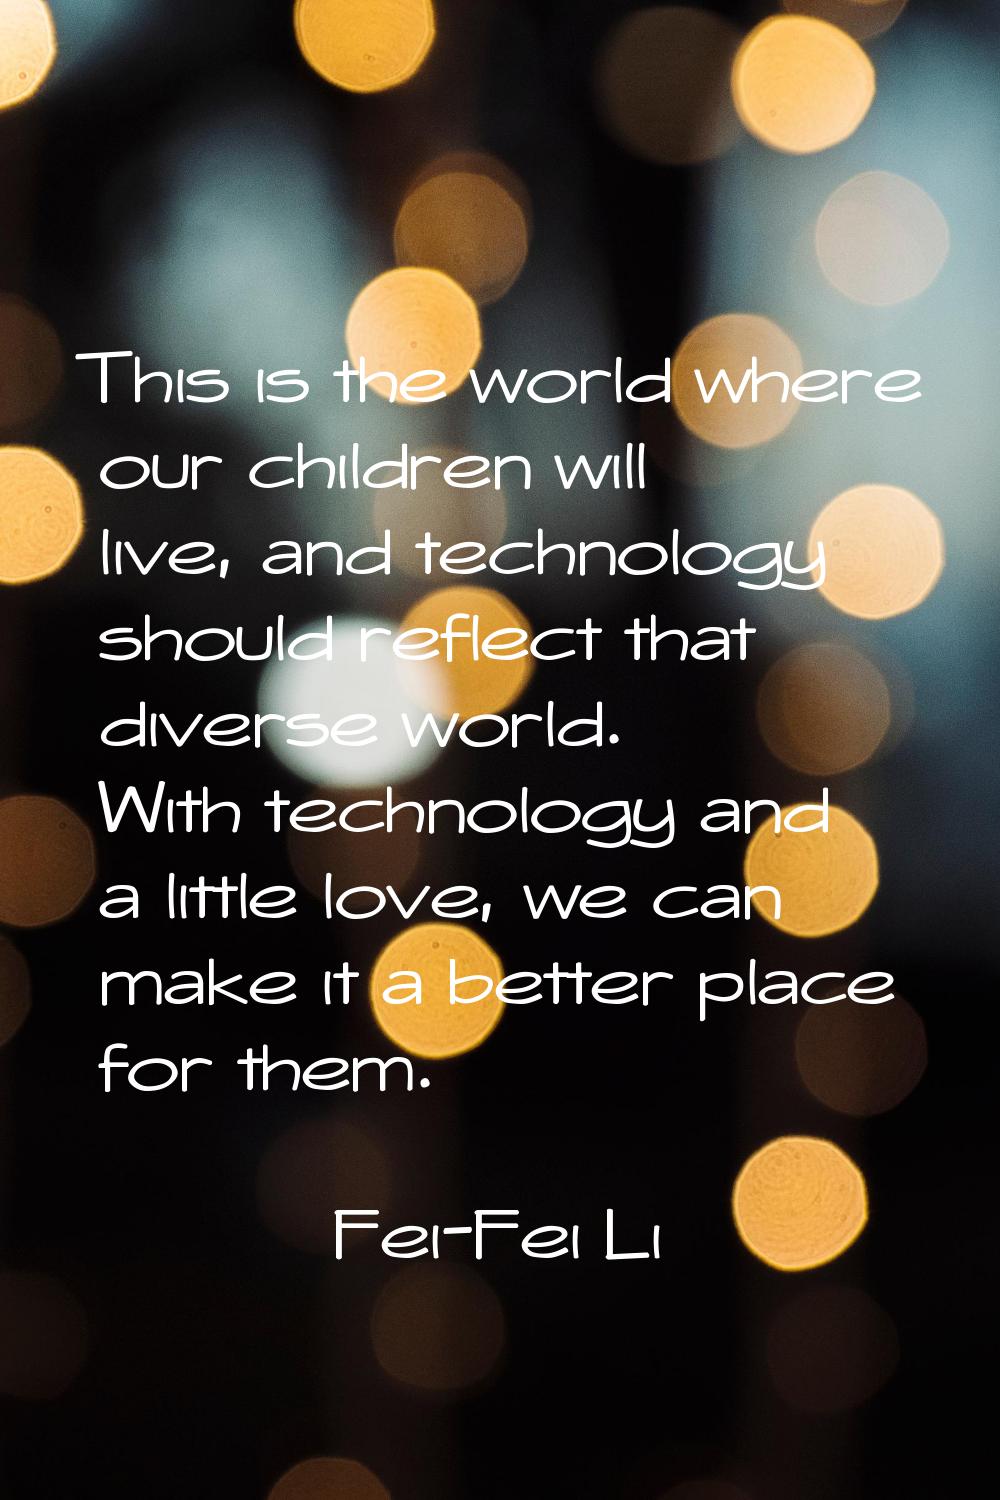 This is the world where our children will live, and technology should reflect that diverse world. W